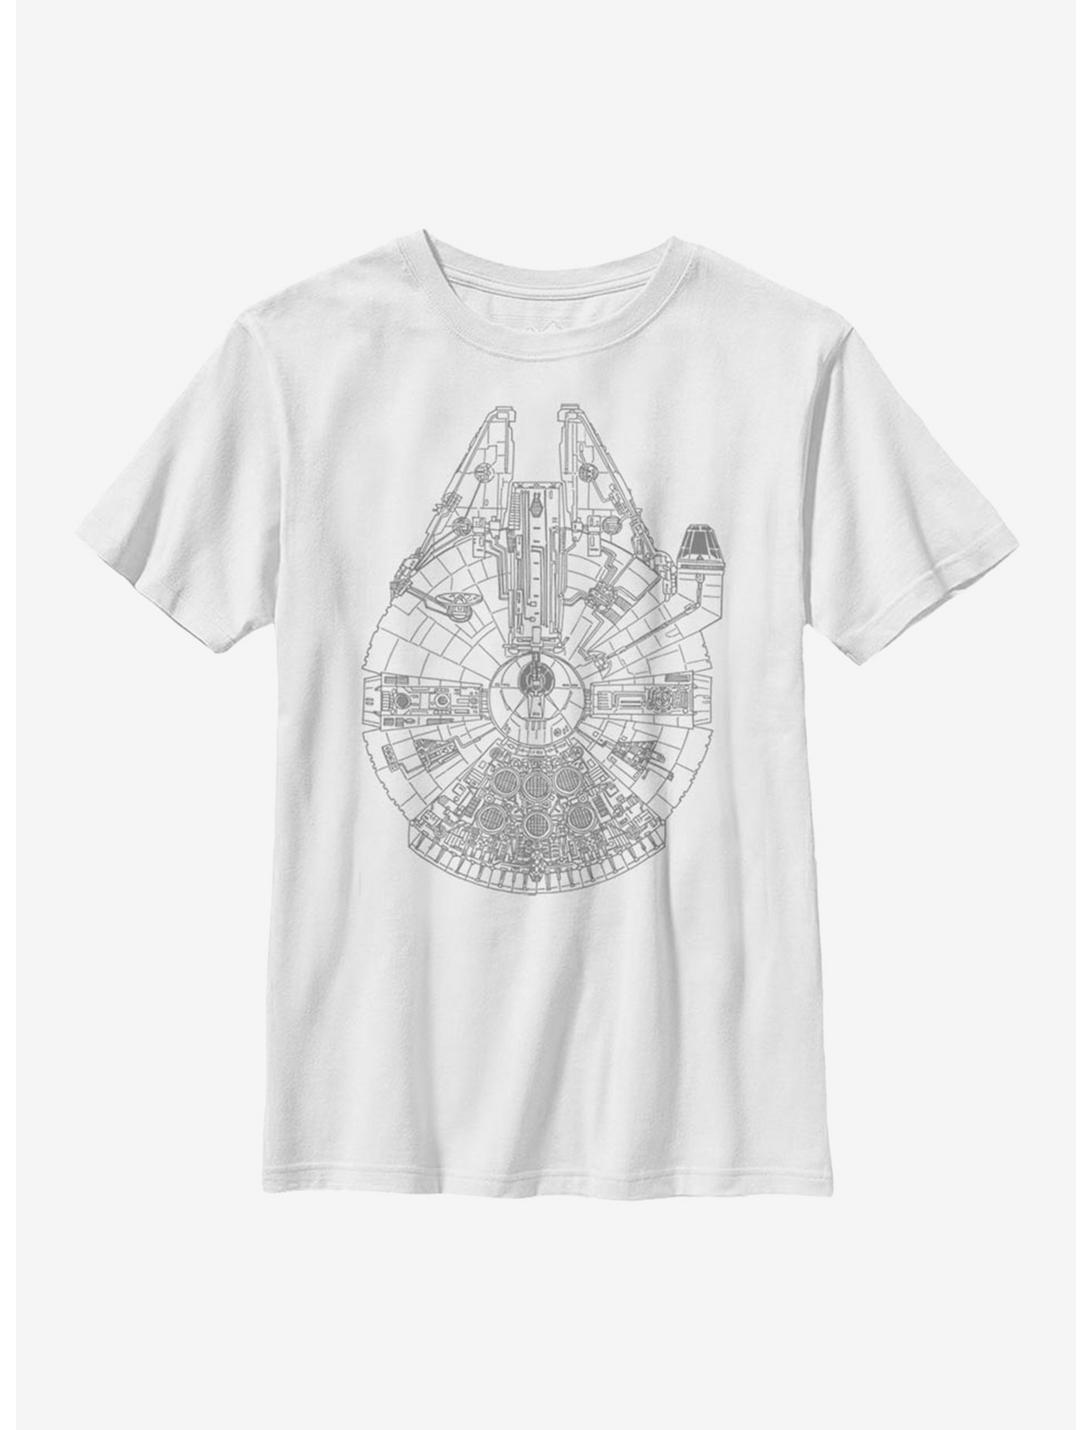 Star Wars Blue Falcon Youth T-Shirt, WHITE, hi-res